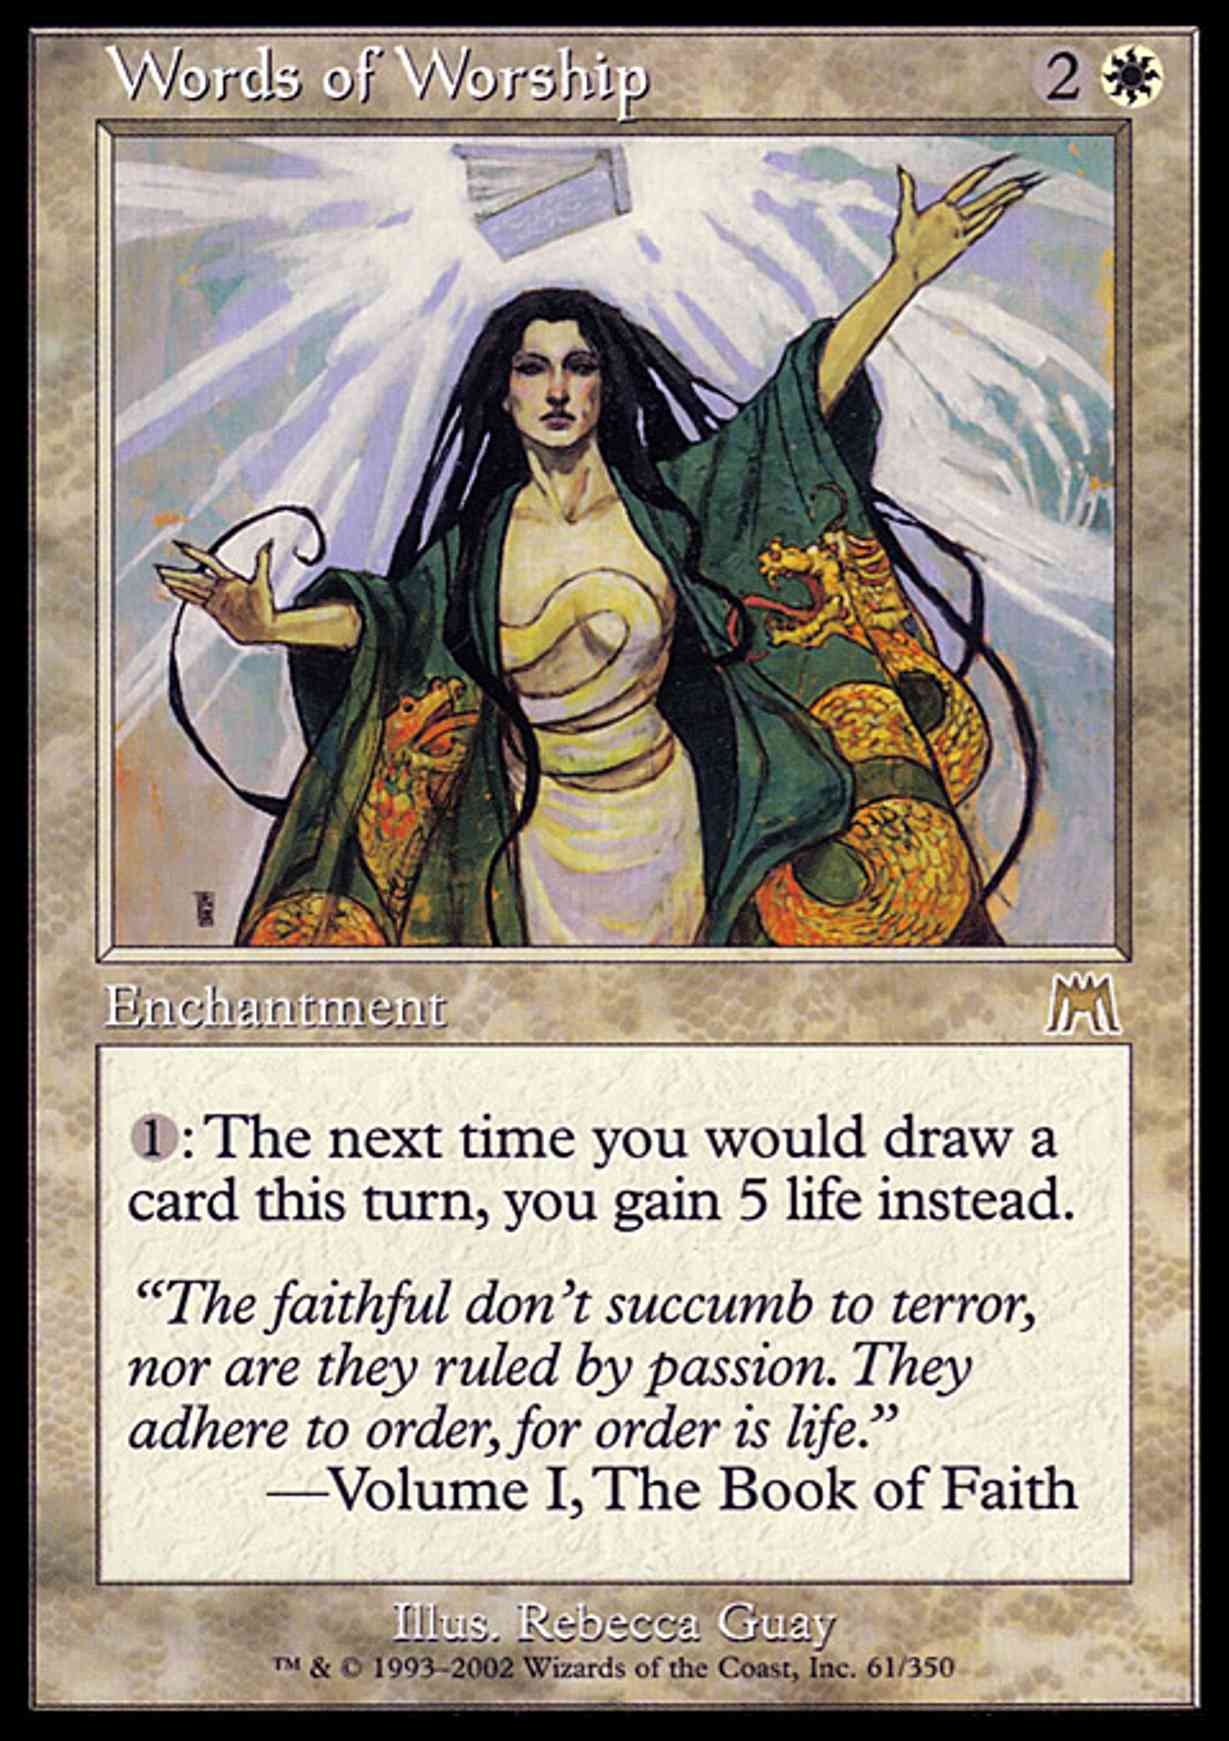 Words of Worship magic card front